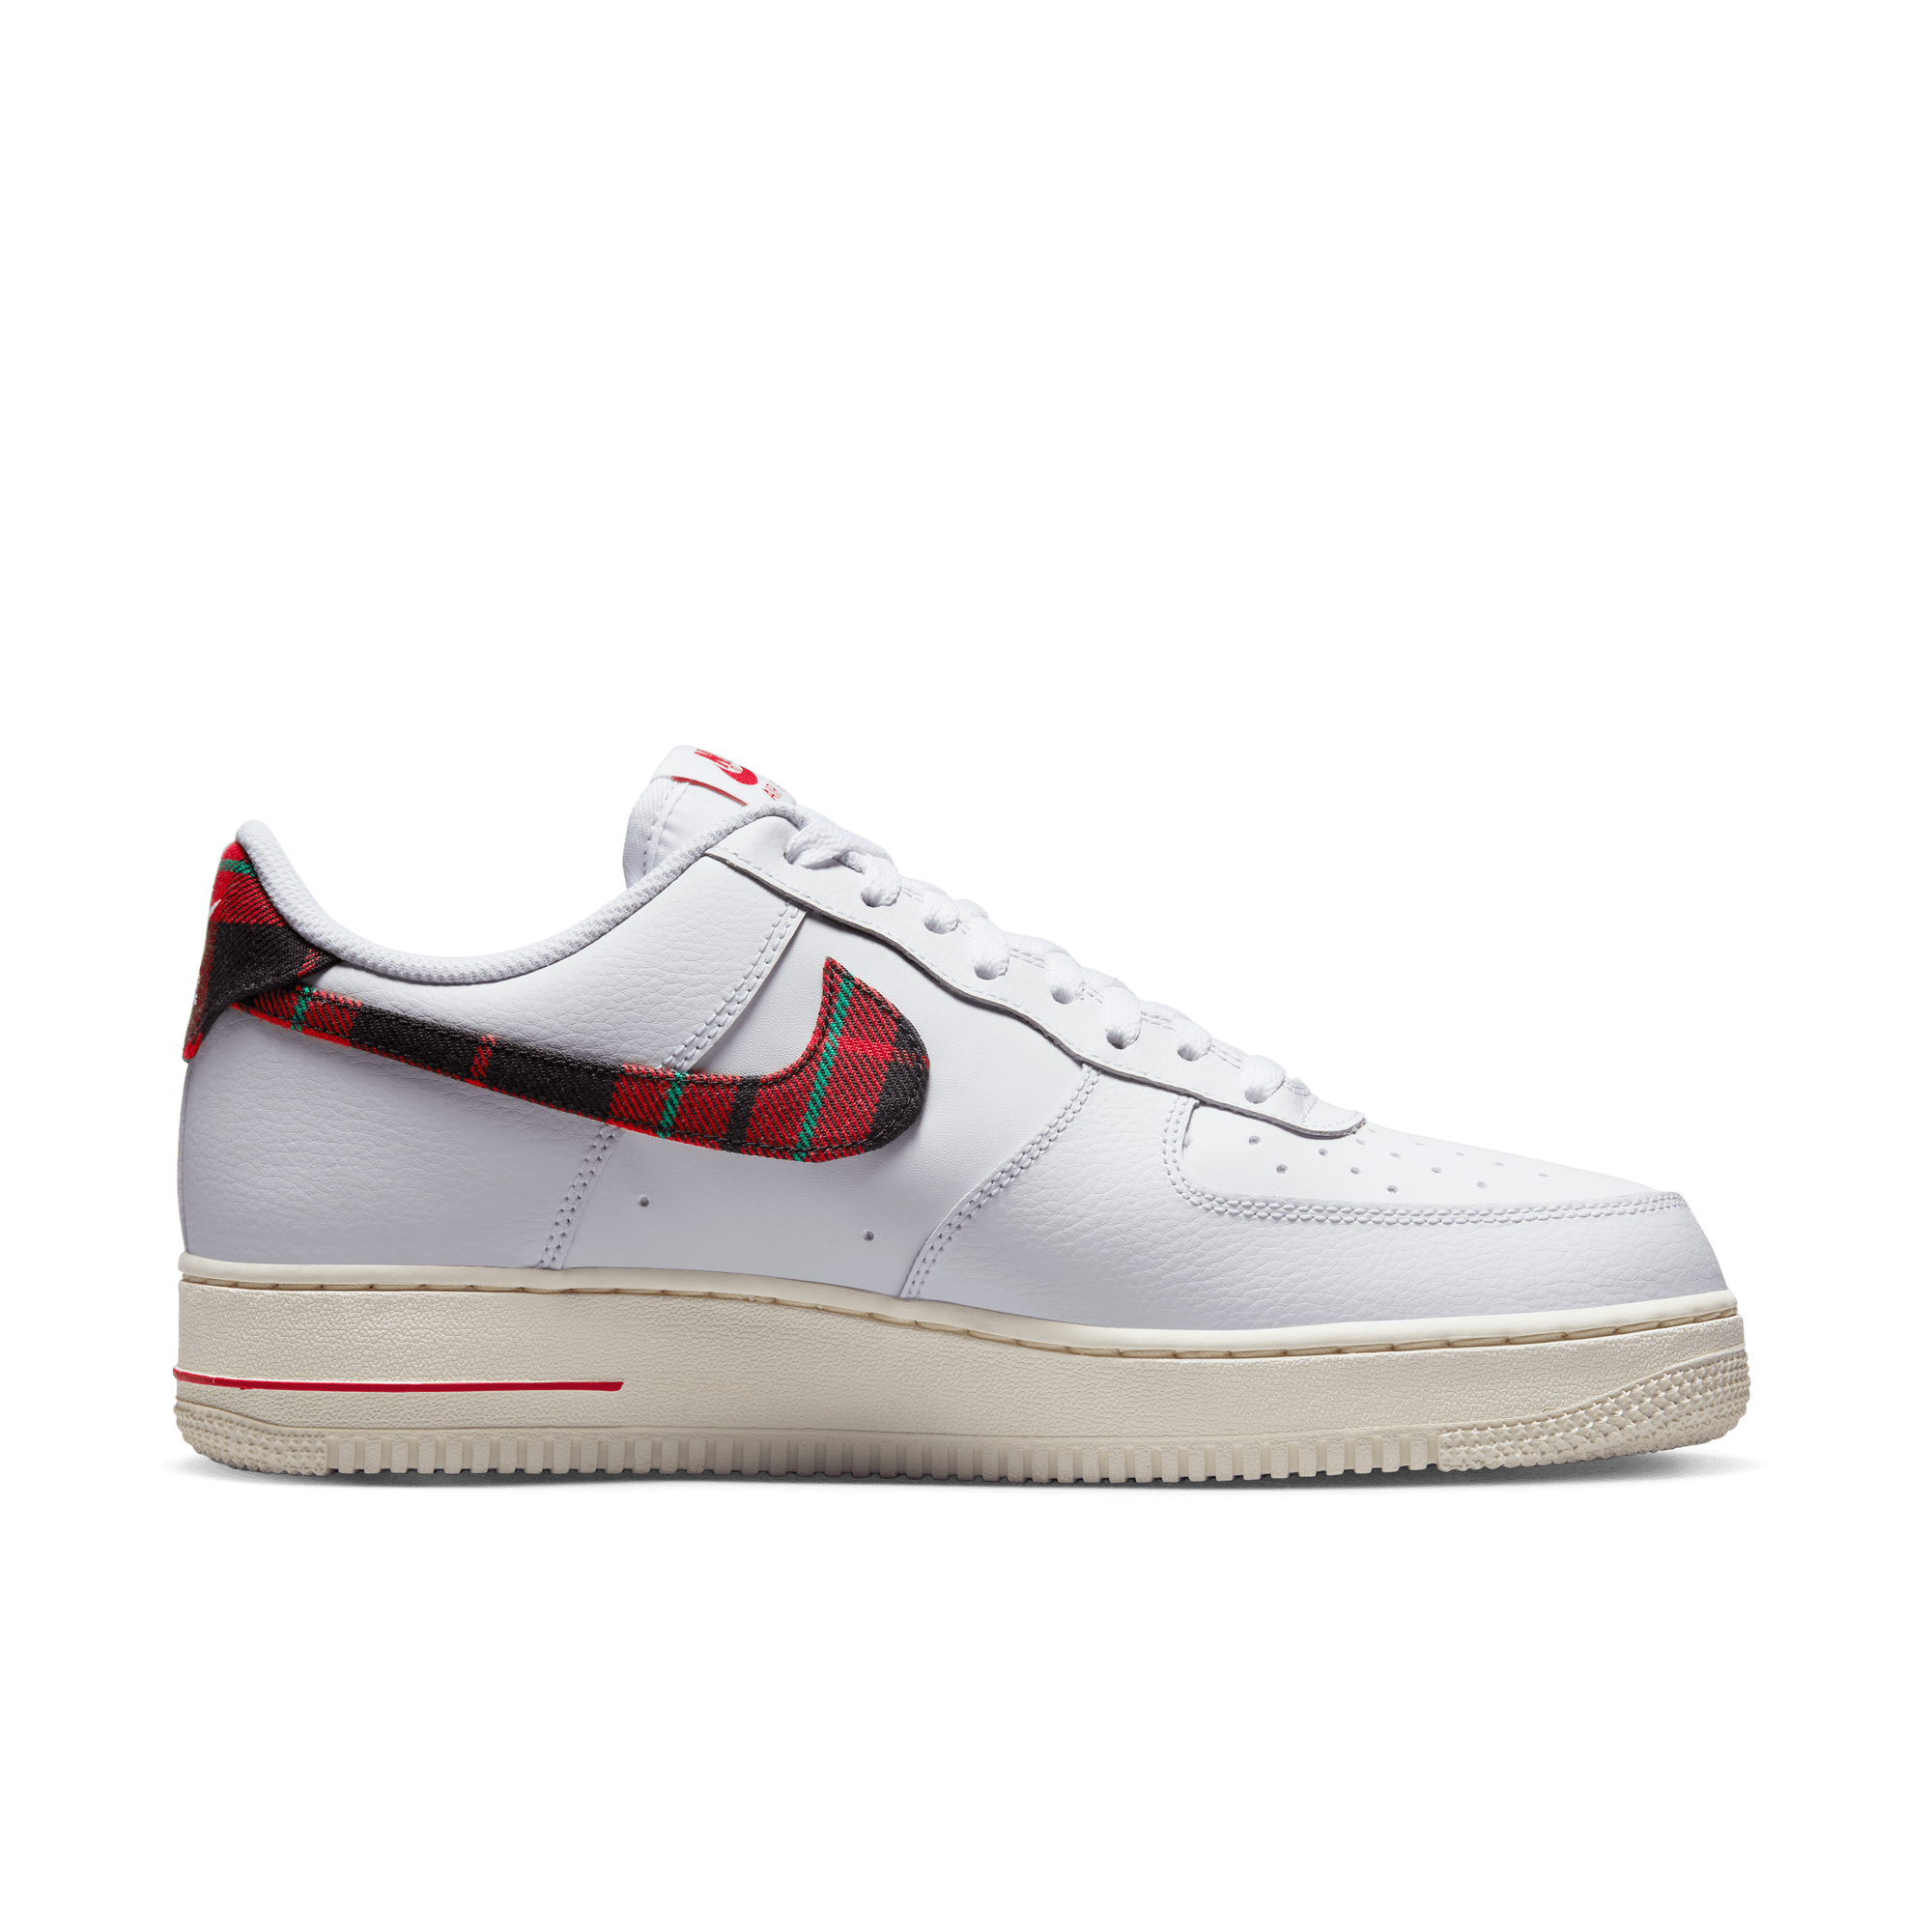 Nike Air Force 1 07 High LV8 Red 13